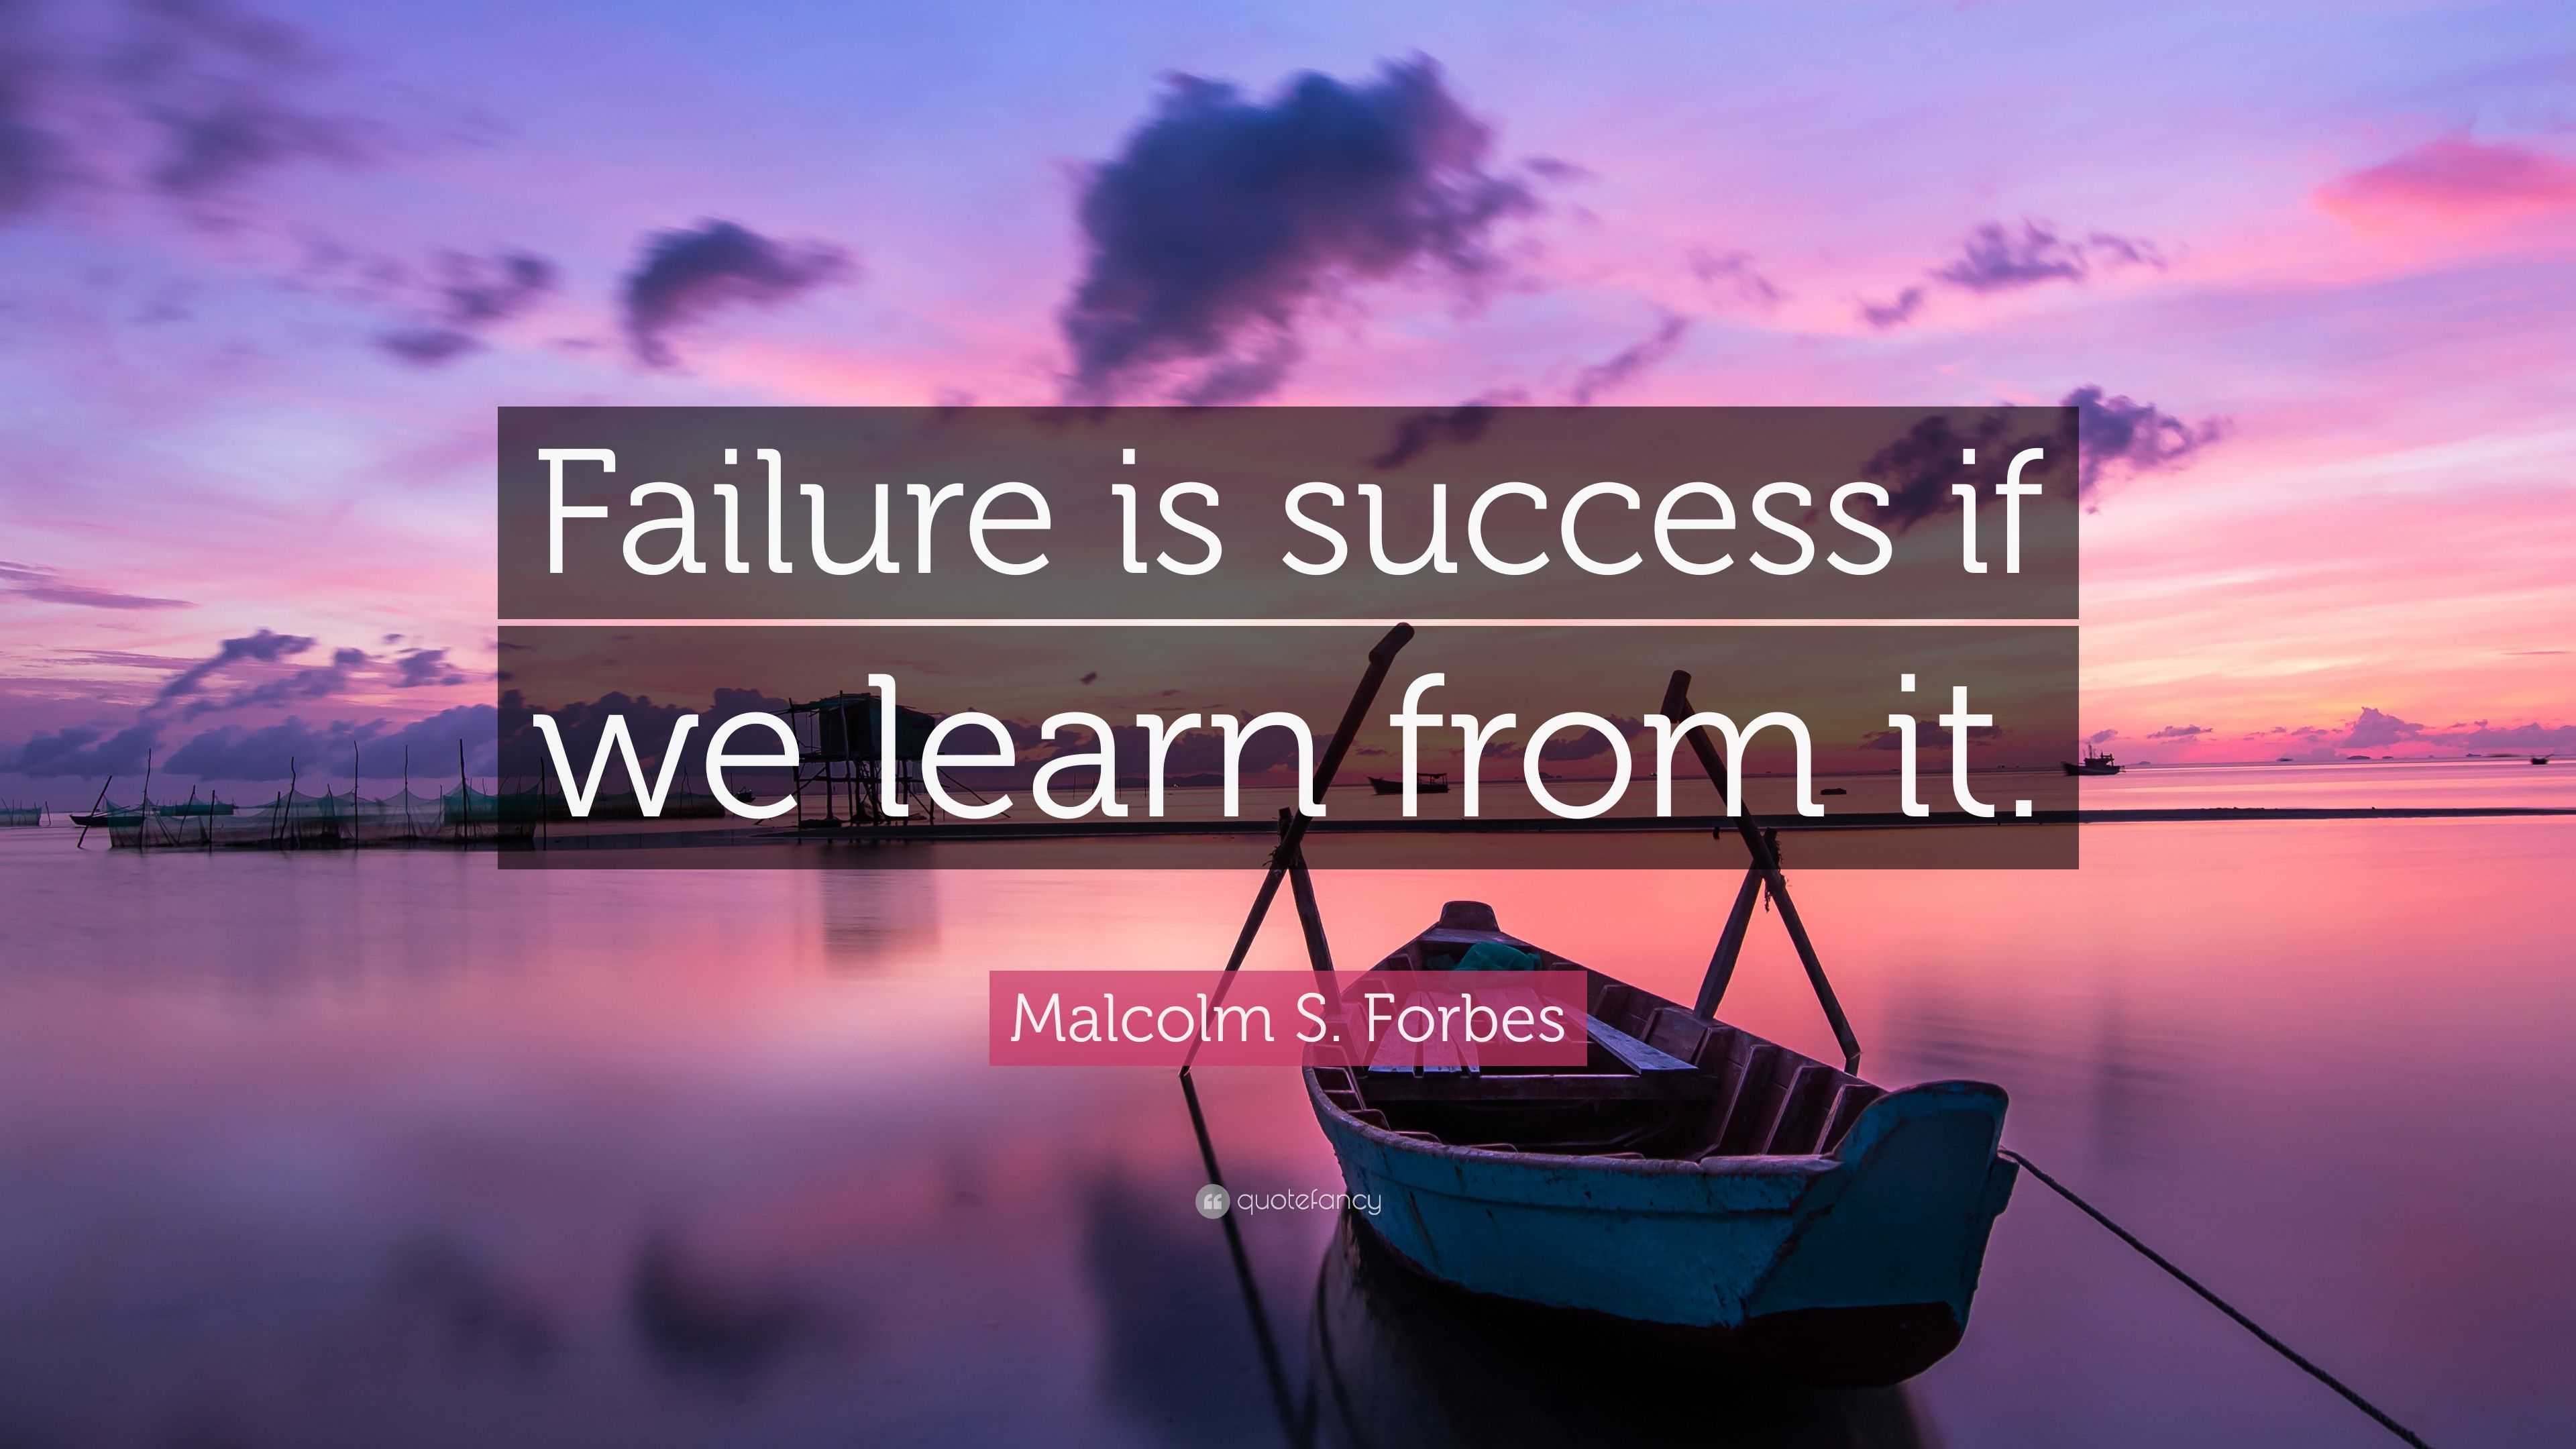 Malcolm S. Forbes Quote: “Failure is success if we learn from it.” (25